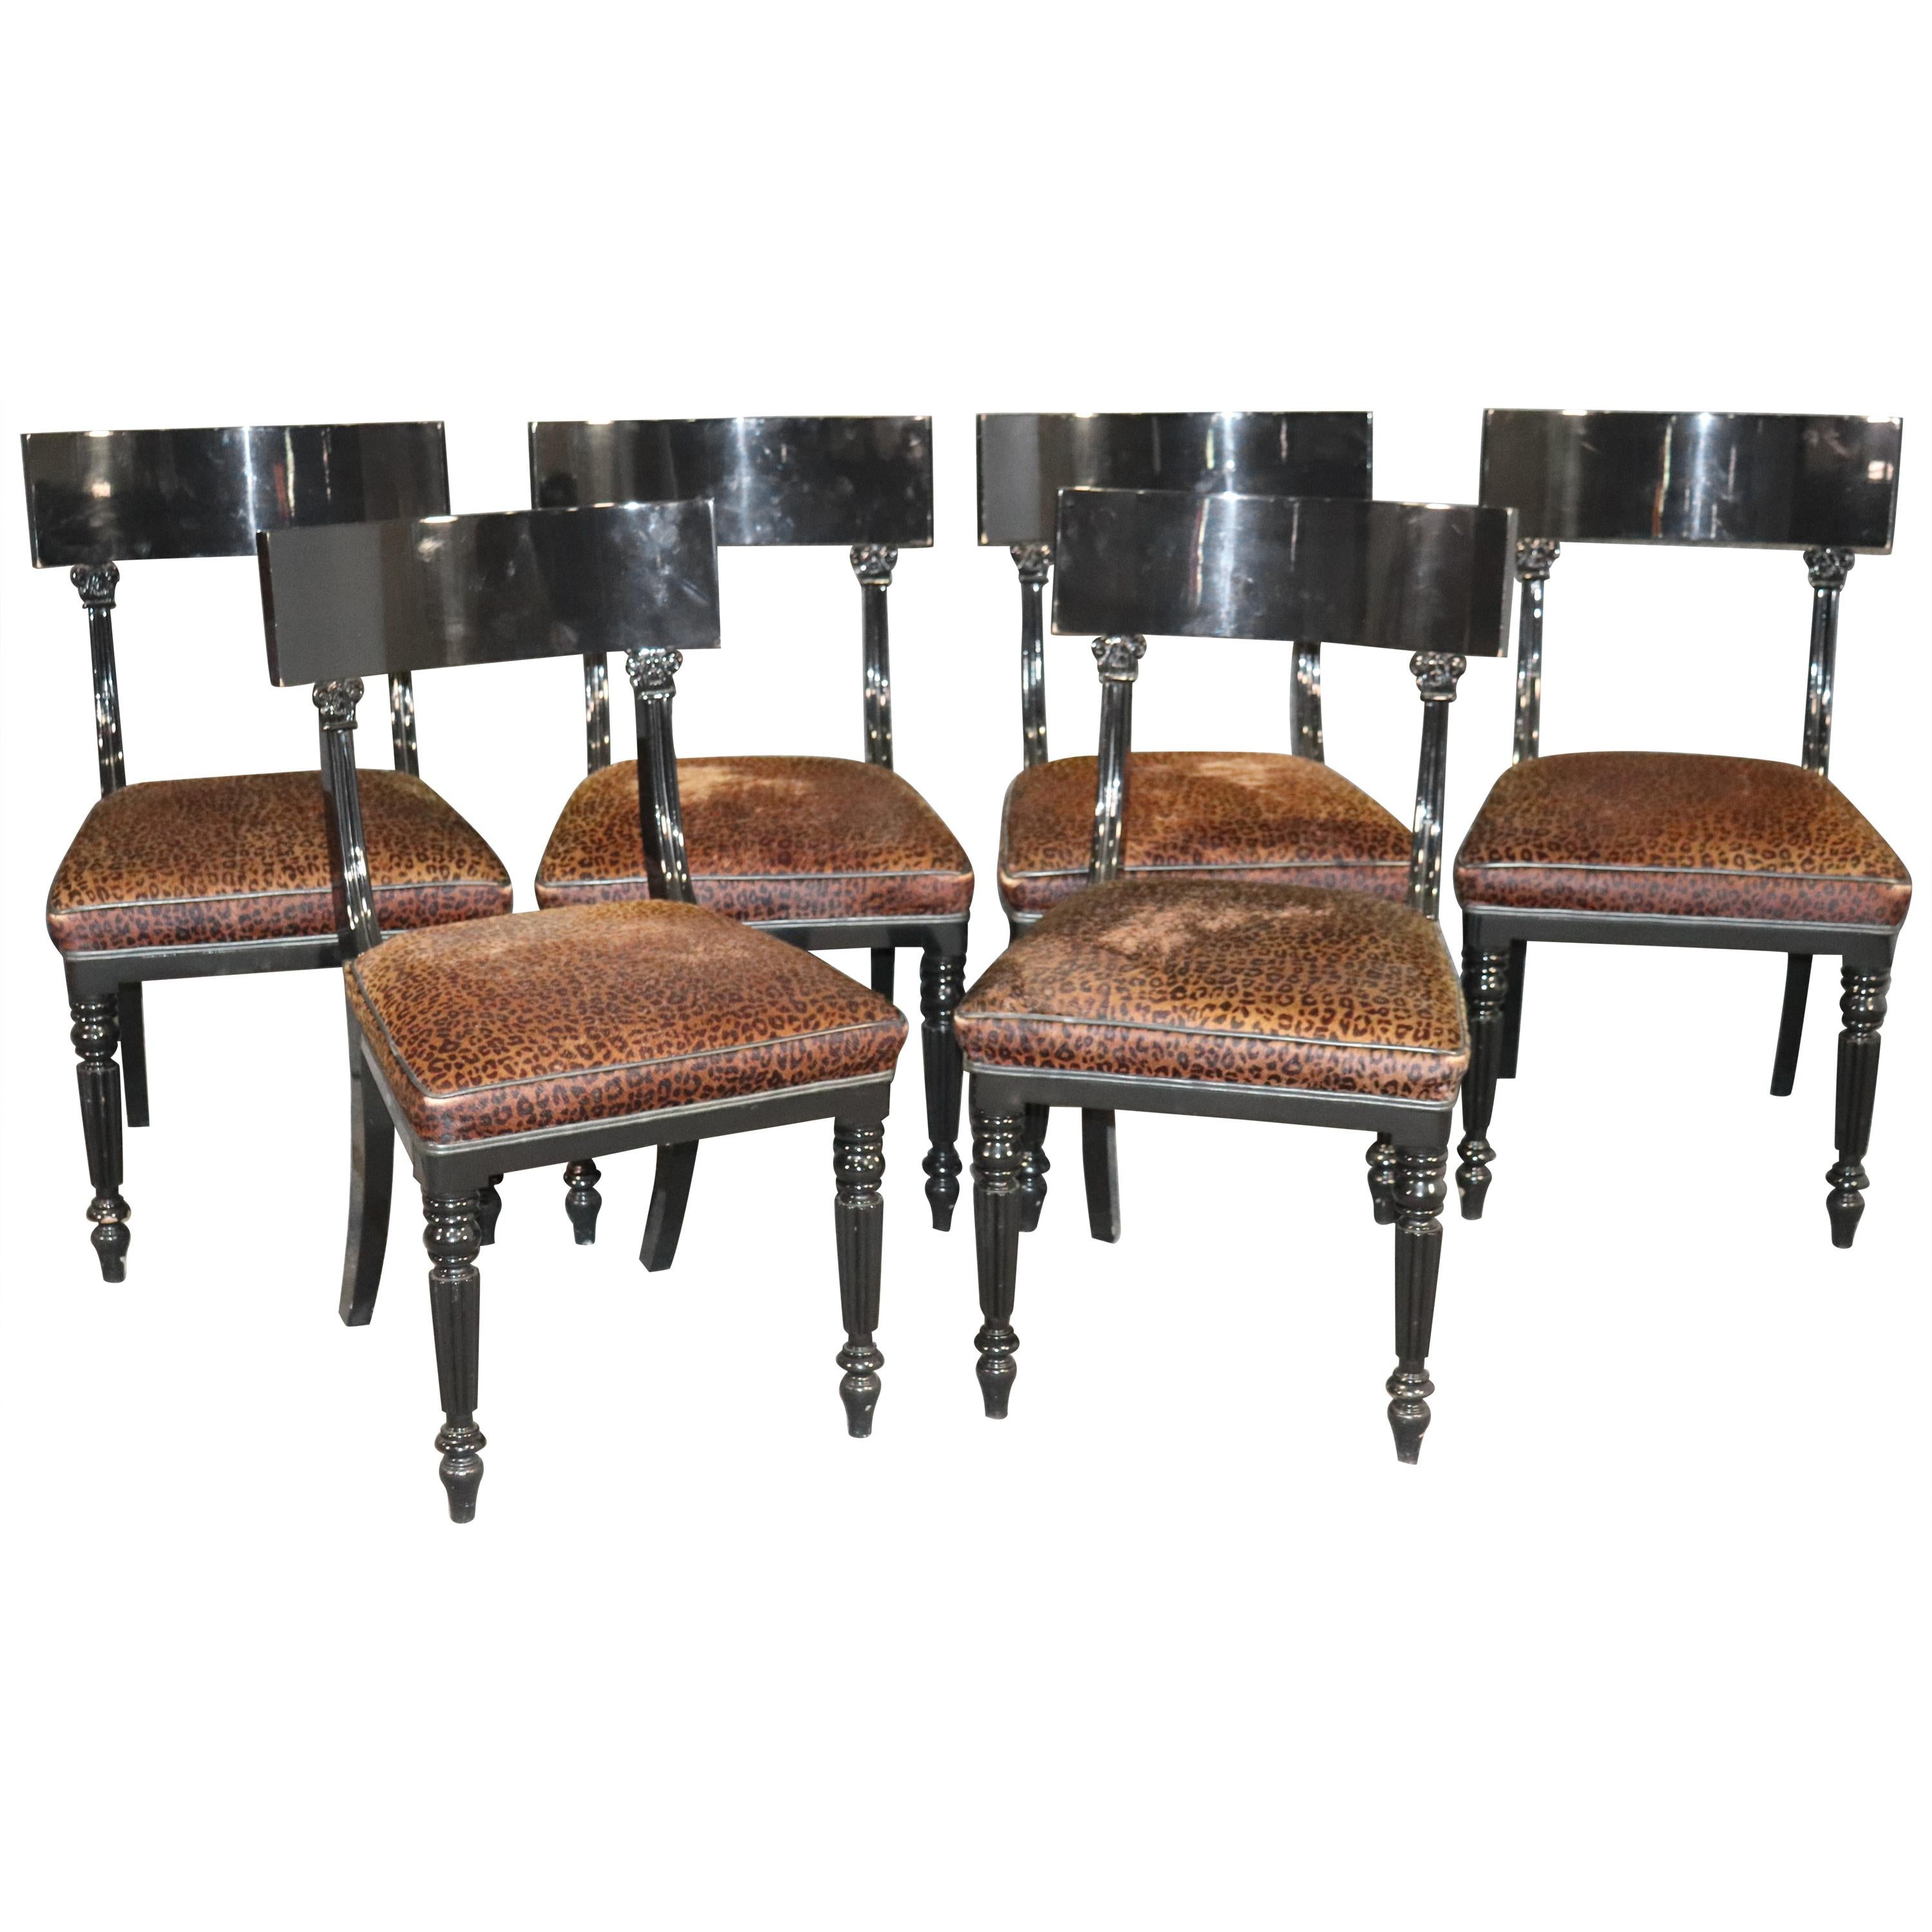 Set of 6 English Regency Style Cheetah Print Dining Side Chairs